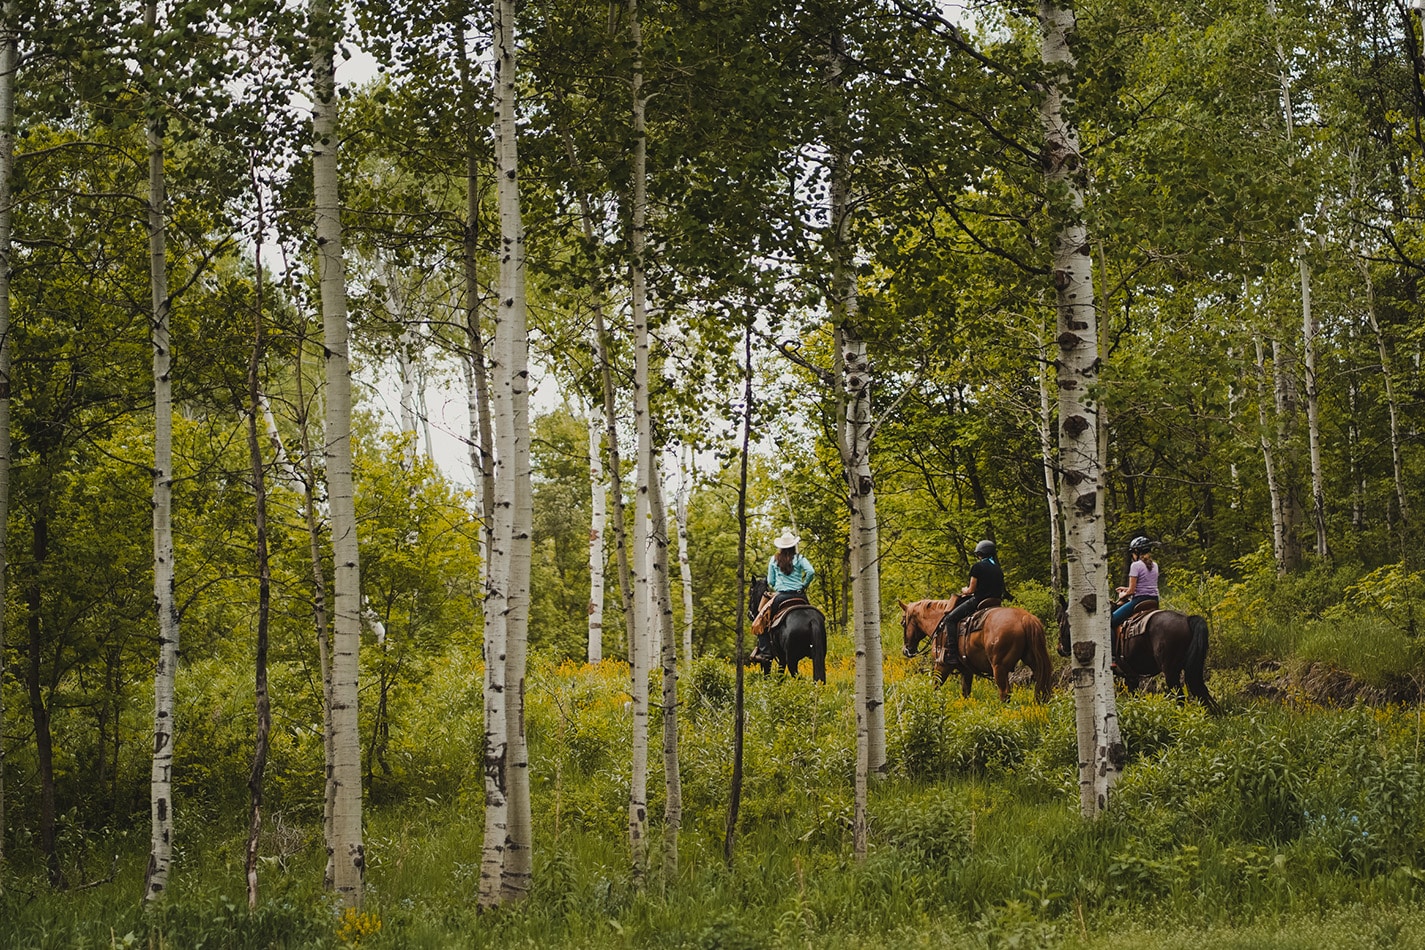 Group of people riding horses through trees